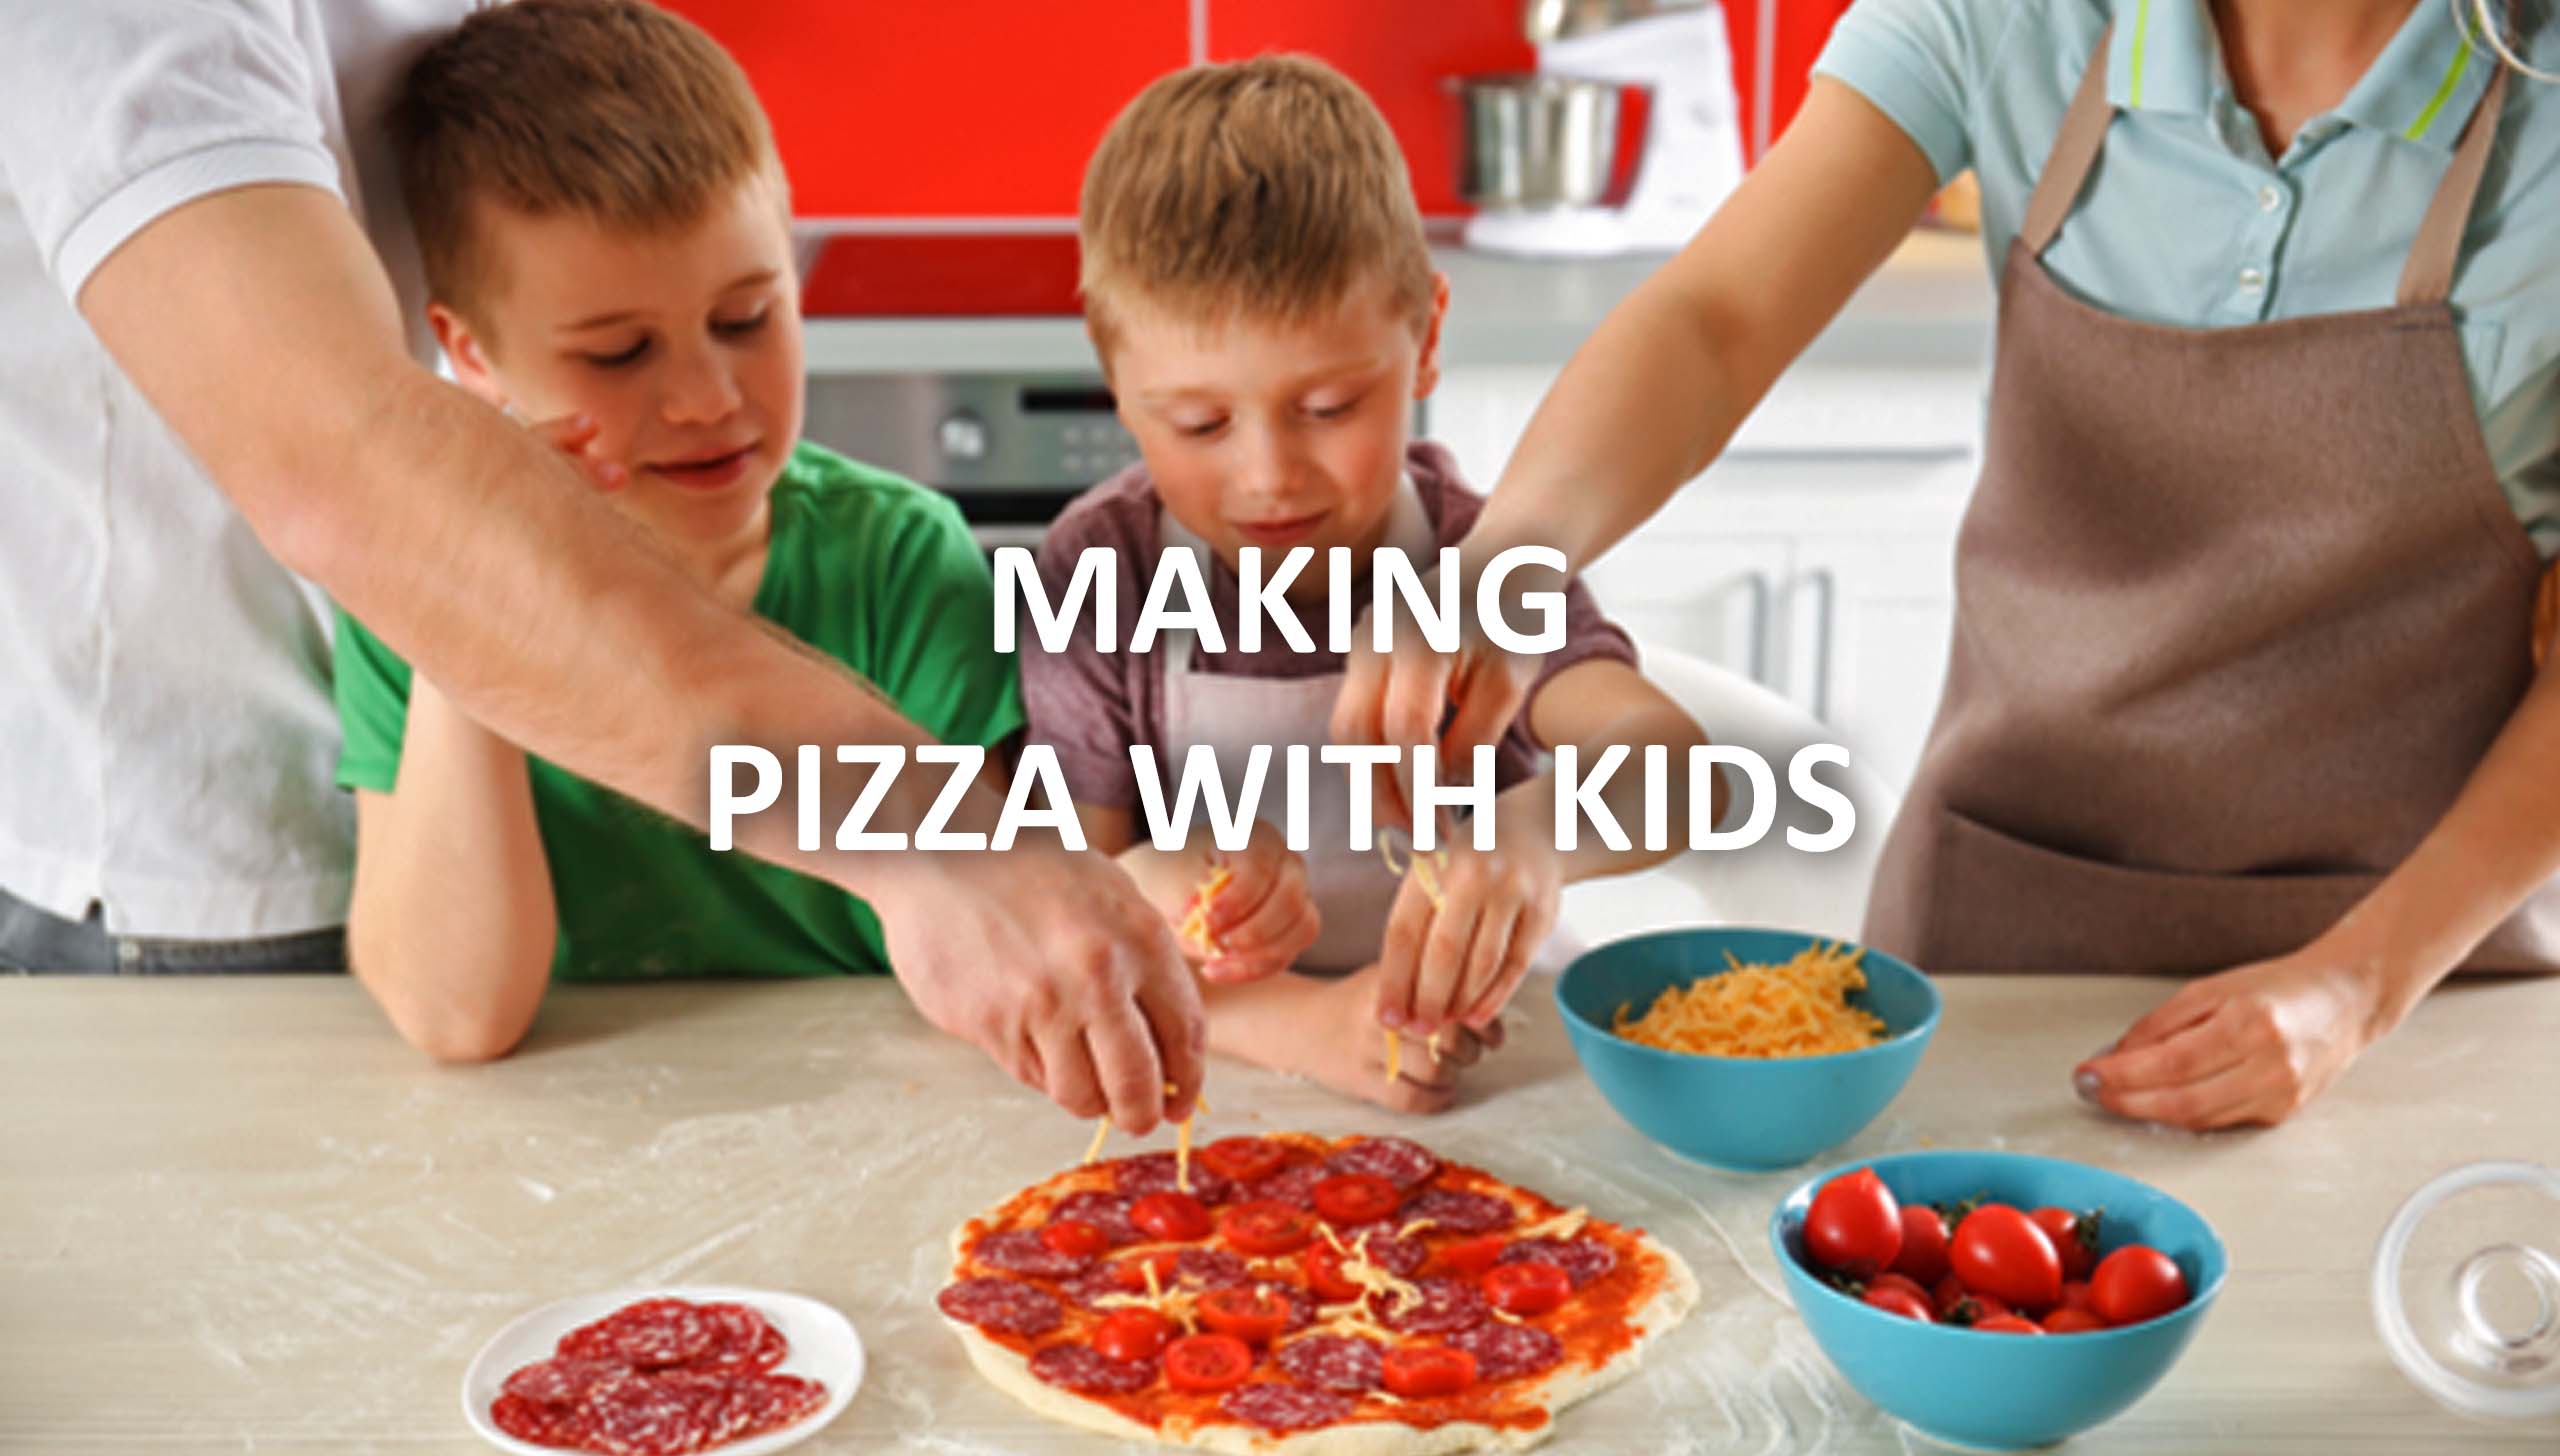 Making pizza with kids - Igneus wood fired pizza ovens uk